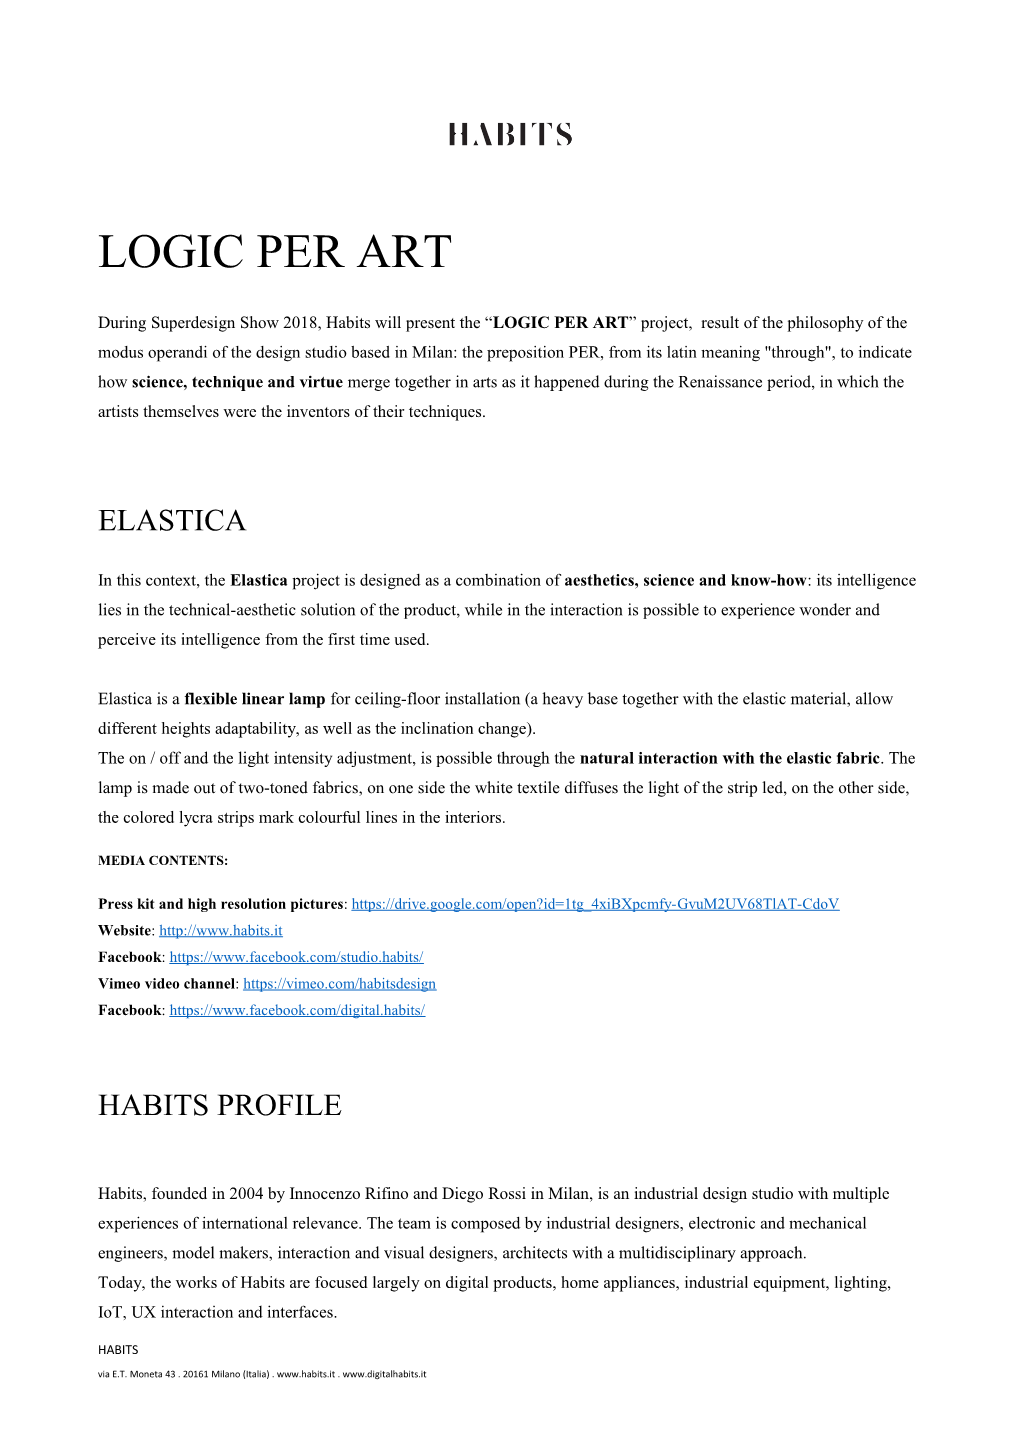 During Superdesign Show 2018, Habits Will Present the LOGIC PER ART Project, Result Of